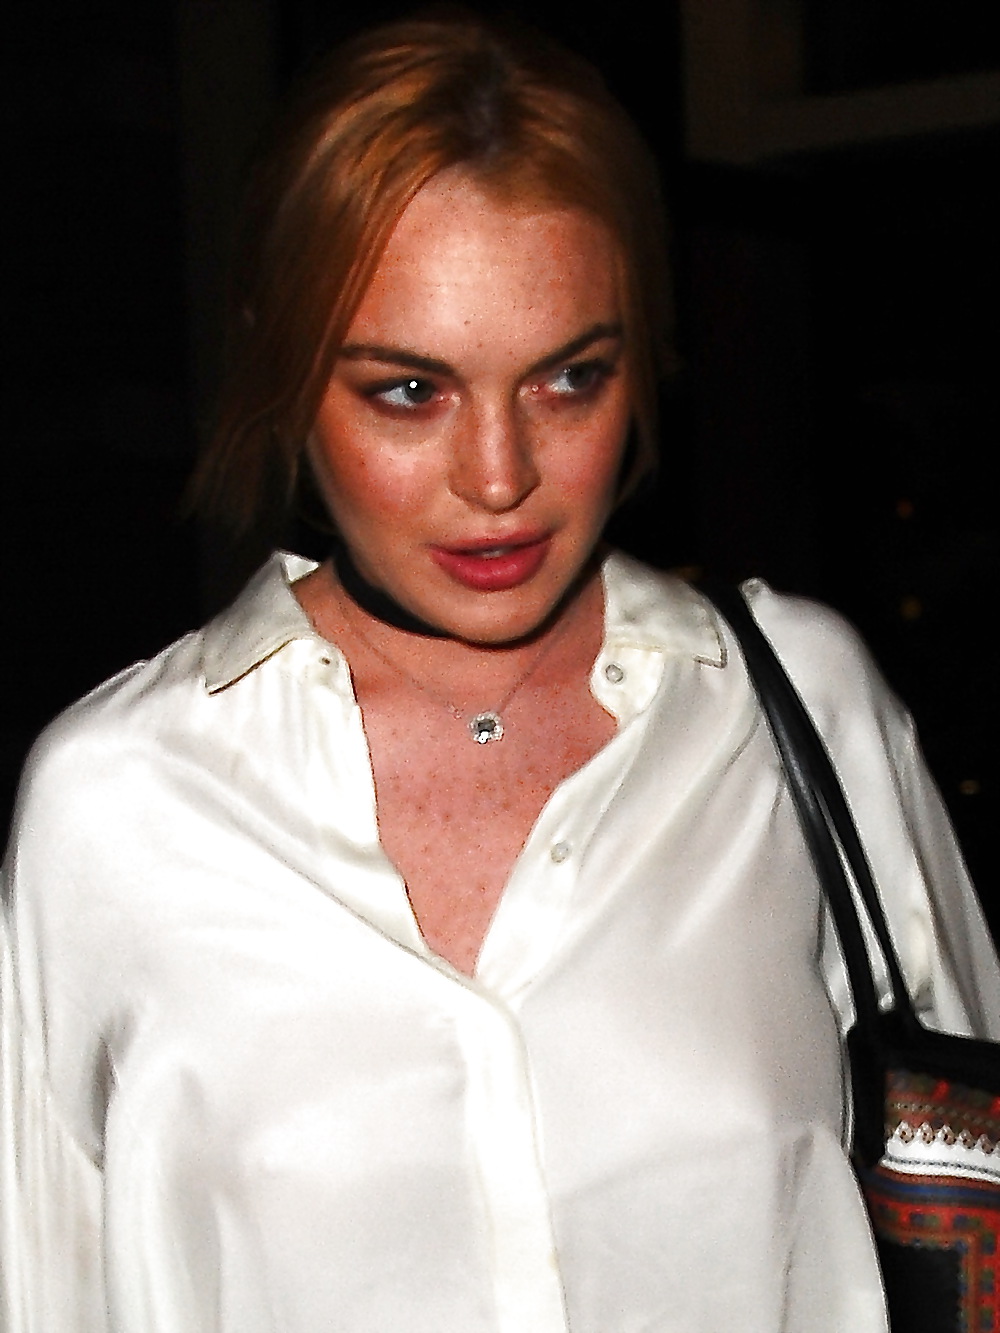 Lindsay Lohan ... Night Out In SoHo Area #23264202